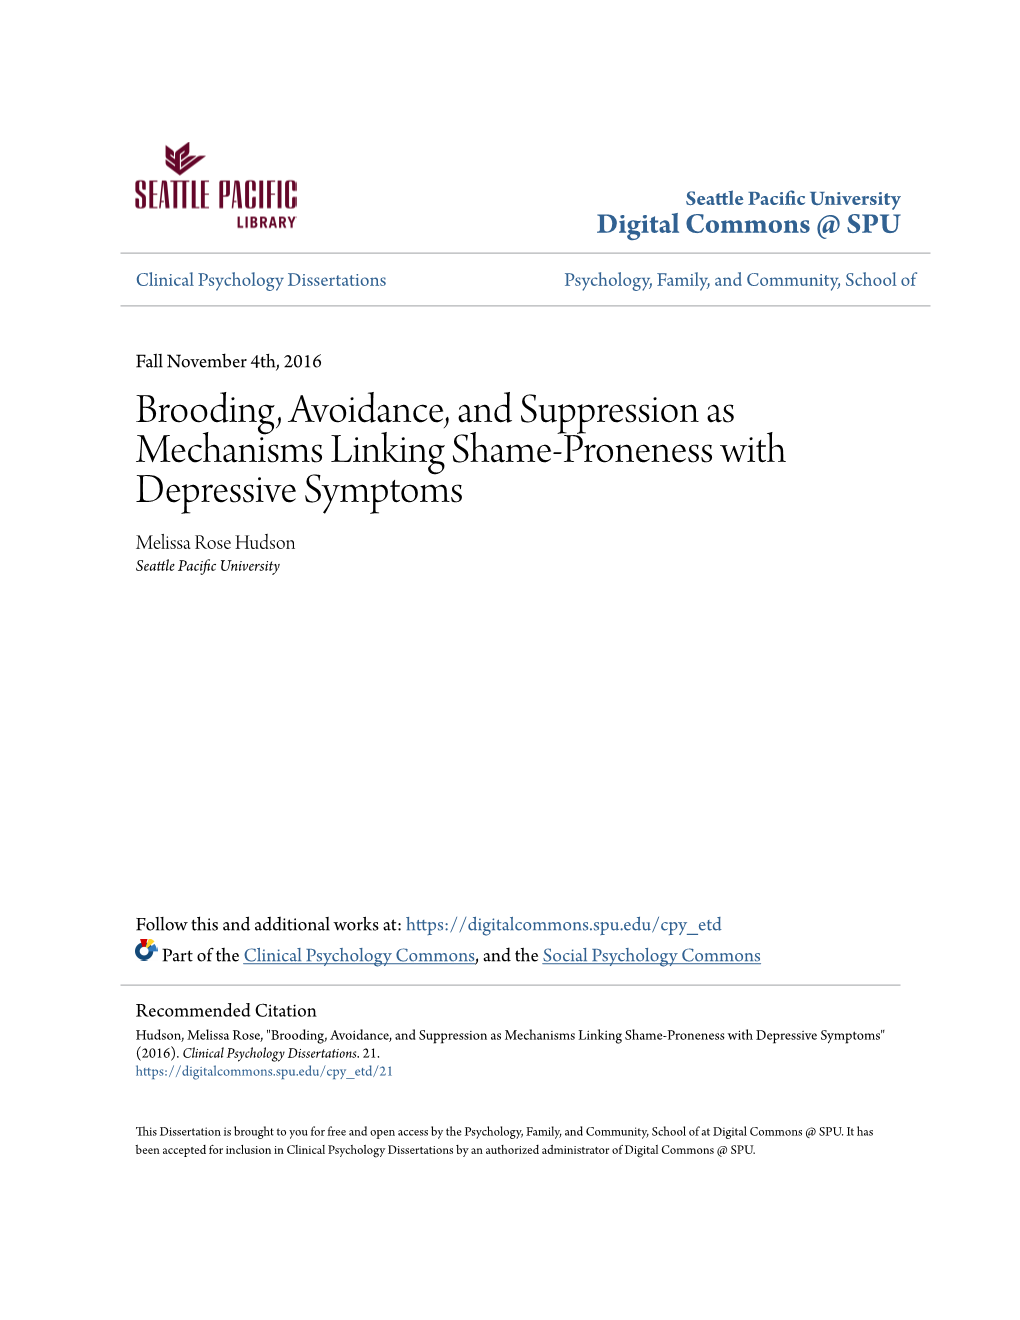 Brooding, Avoidance, and Suppression As Mechanisms Linking Shame-Proneness with Depressive Symptoms Melissa Rose Hudson Seattle Pacific Nu Iversity